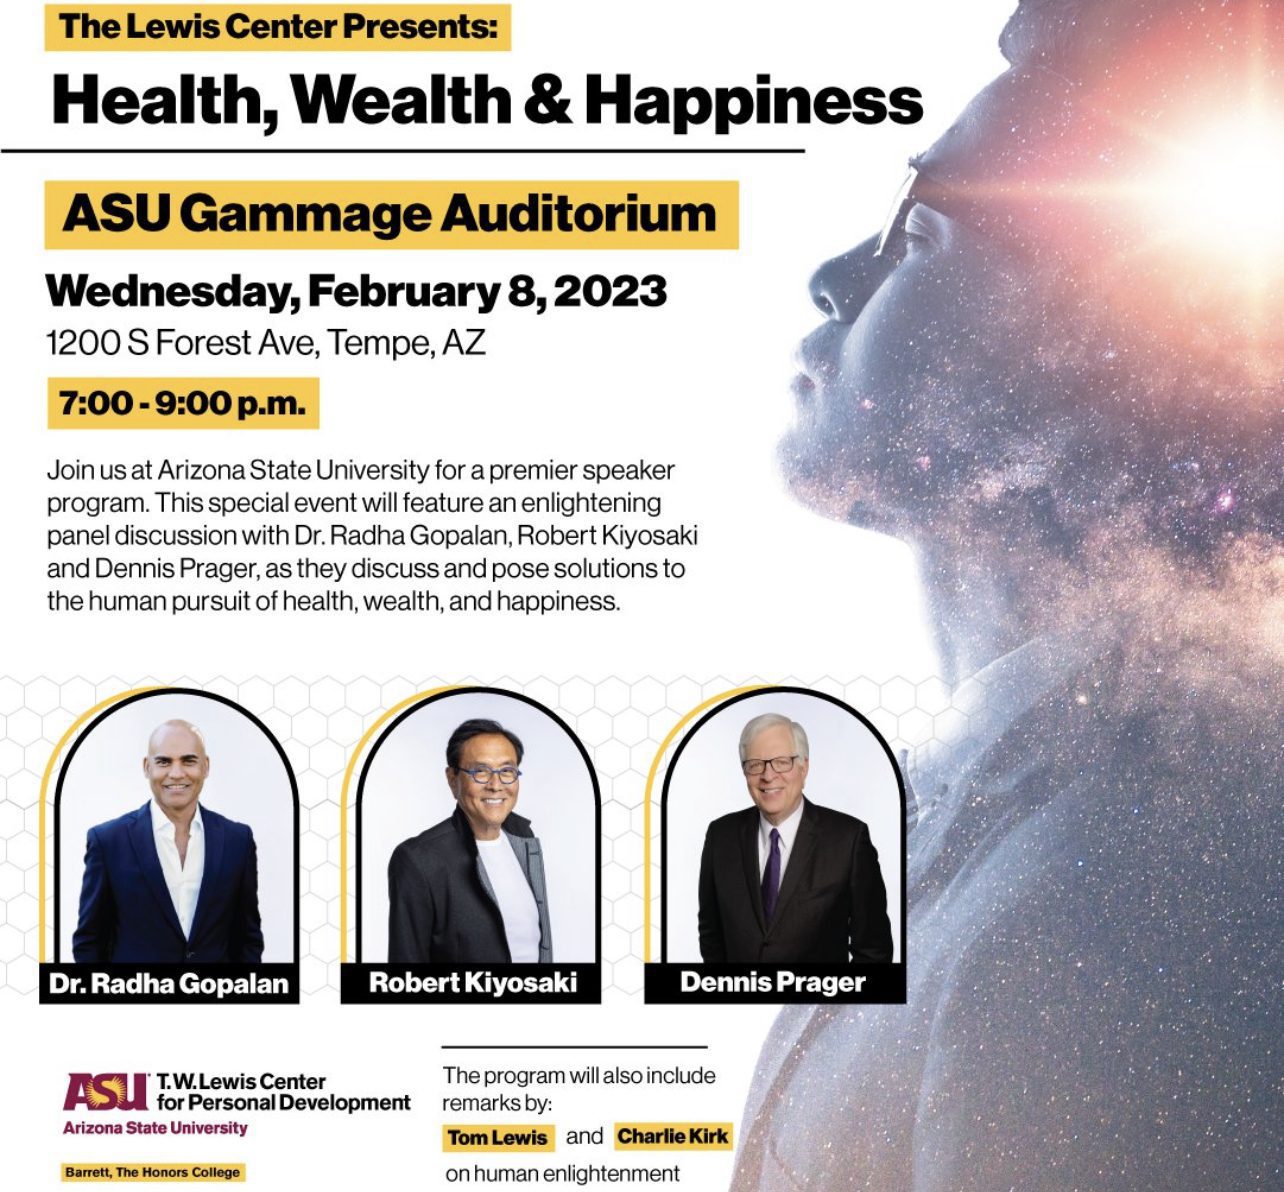 EXCLUSIVE: 37 Marxist Arizona State University Honors Faculty Members Sign Petition Against Robert Kiyosaki, Dennis Prager, And Charlie Kirk Speaking On Campus – PETITION AND NAMES INCLUDED